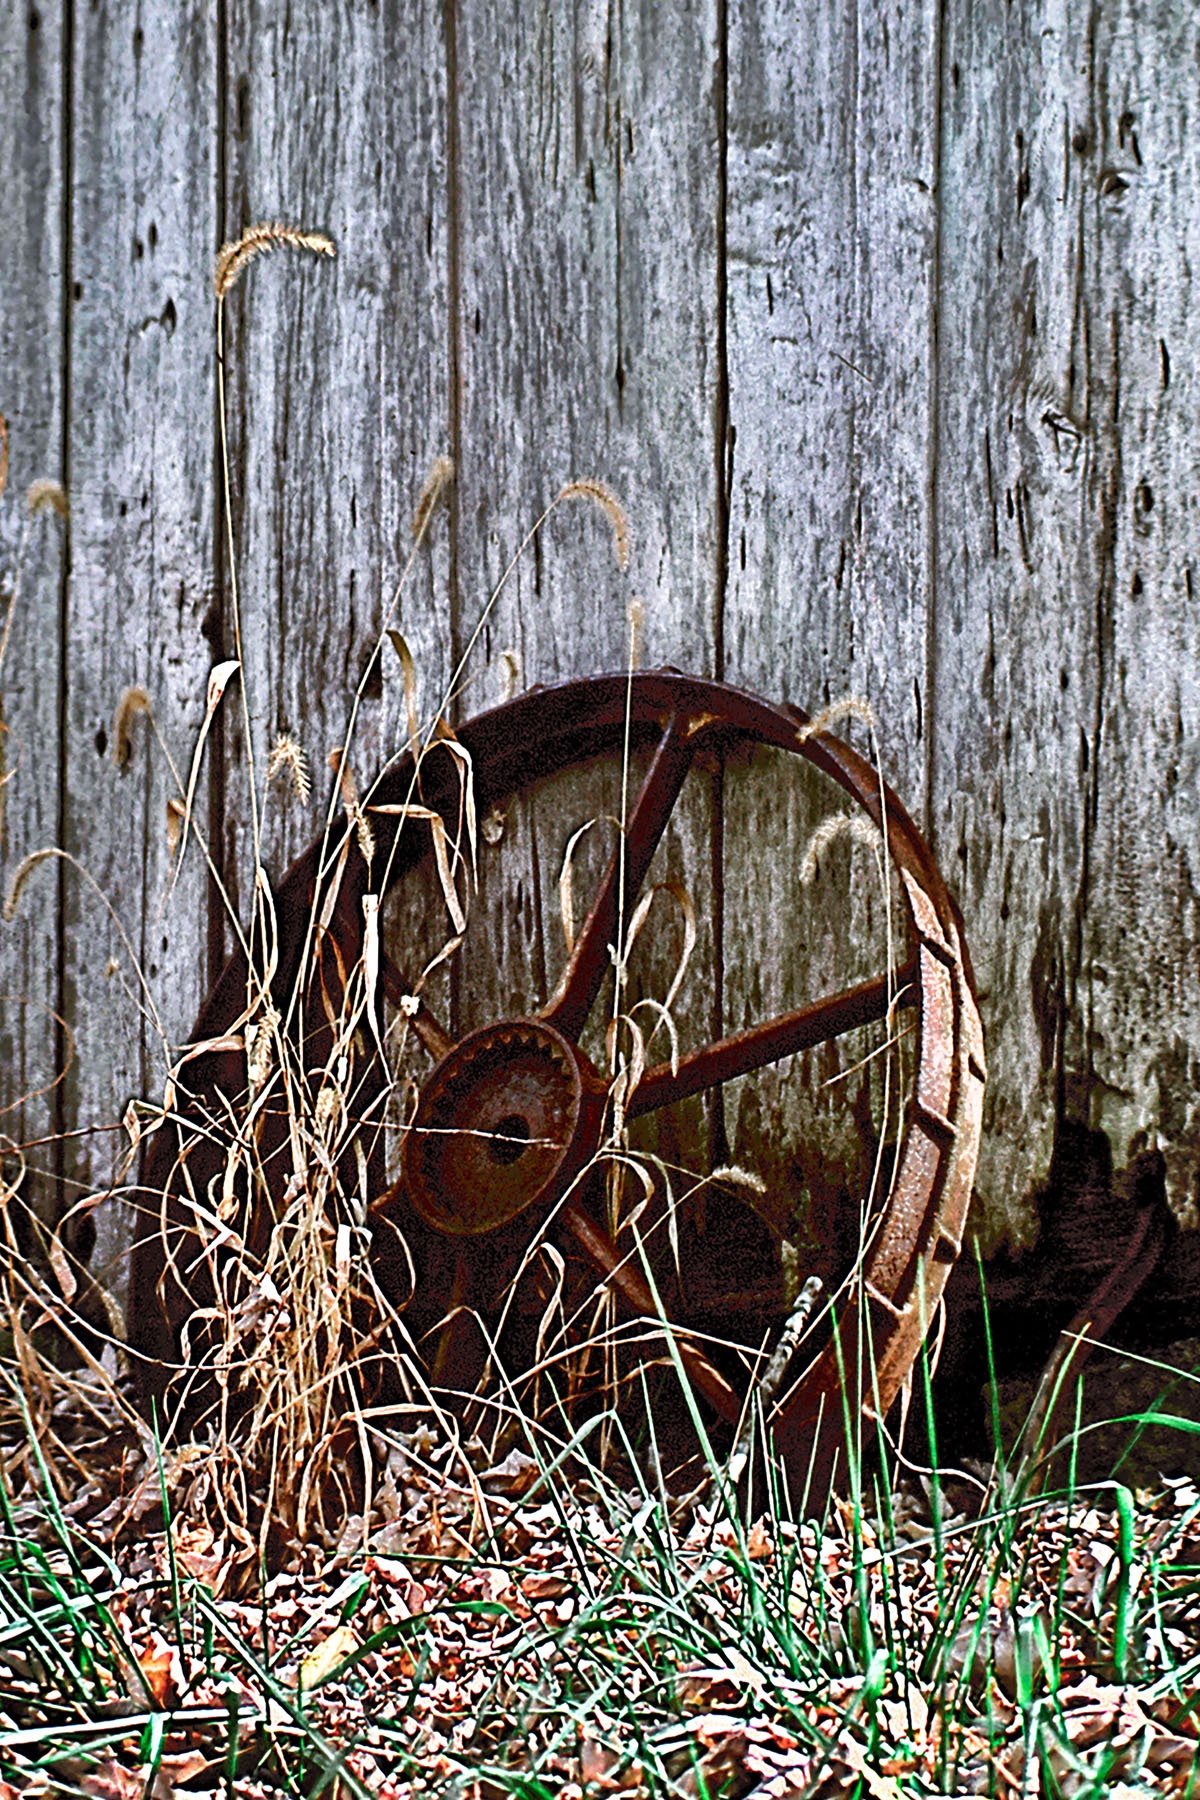 FOUND A WHEEL - I came across this old wheel laying against this old barn down in central Kentucky. I don’t know... just something about it.